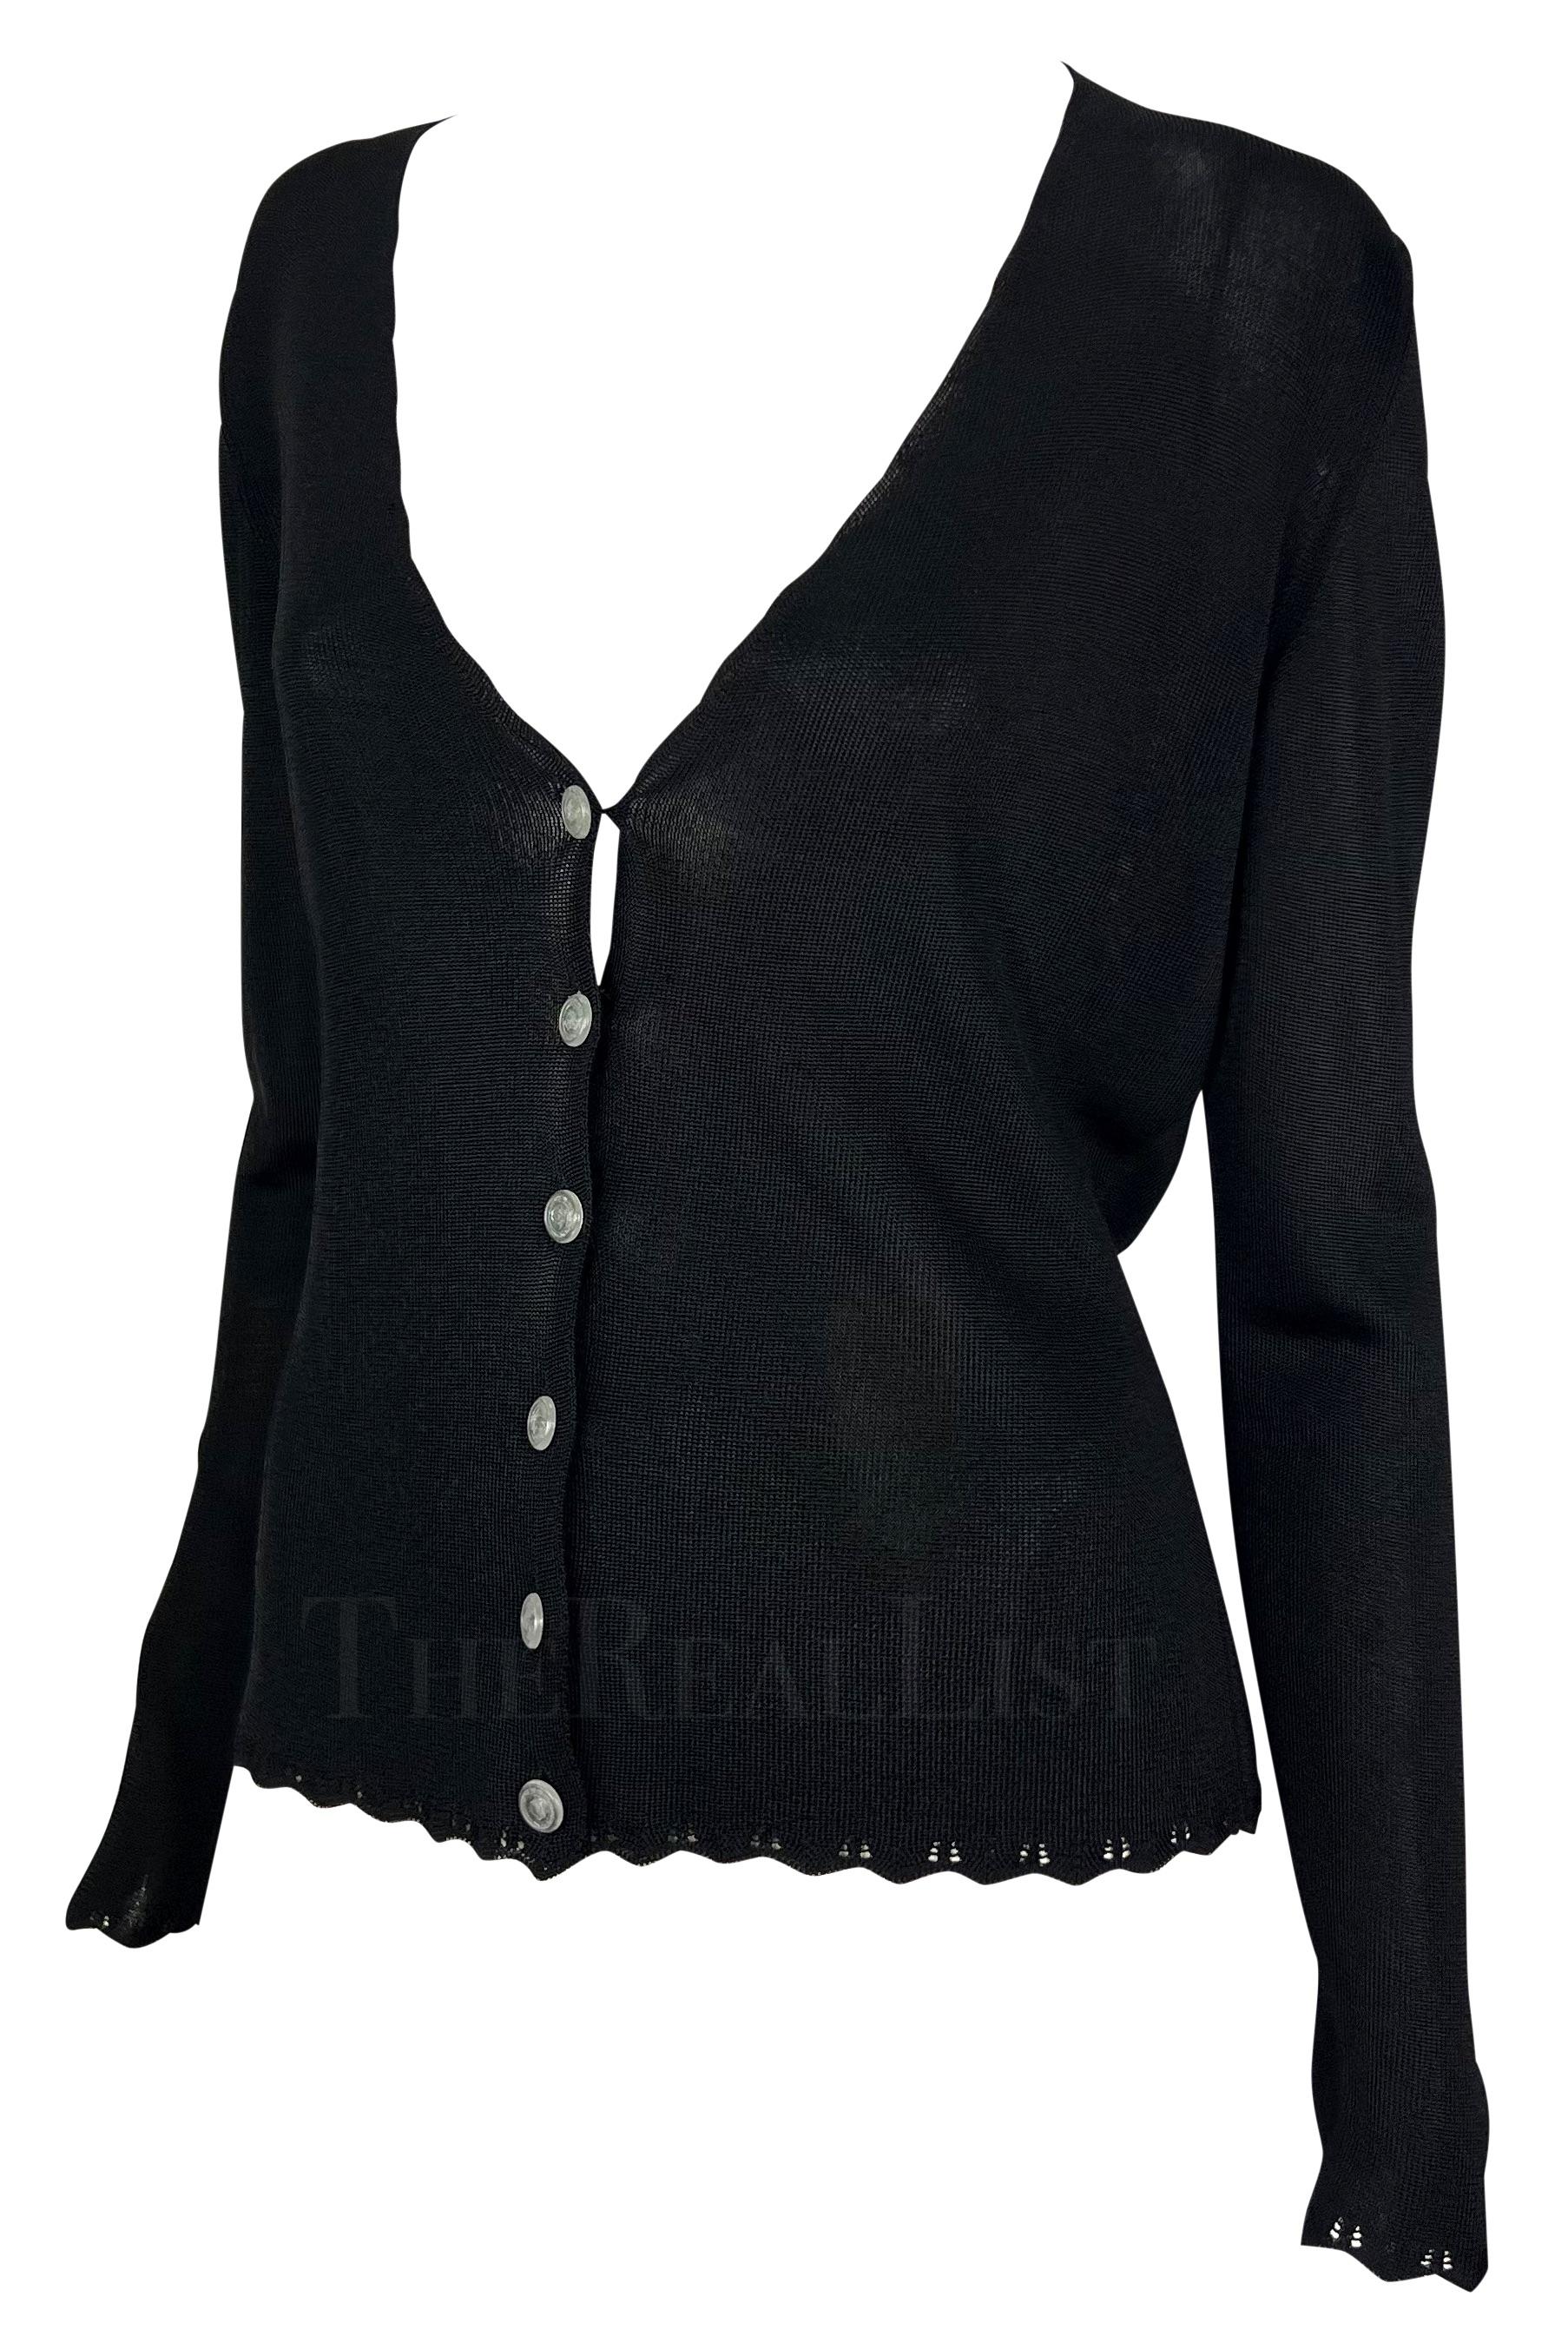 Presenting a fabulous black knit Gianni Versace cardigan, designed by Gianni Versace. From the Spring/Summer 1997 collection, this sweater features a wide v-neckline, scalloped details at the hem, cuffs, and neckline, and is made complete with clear